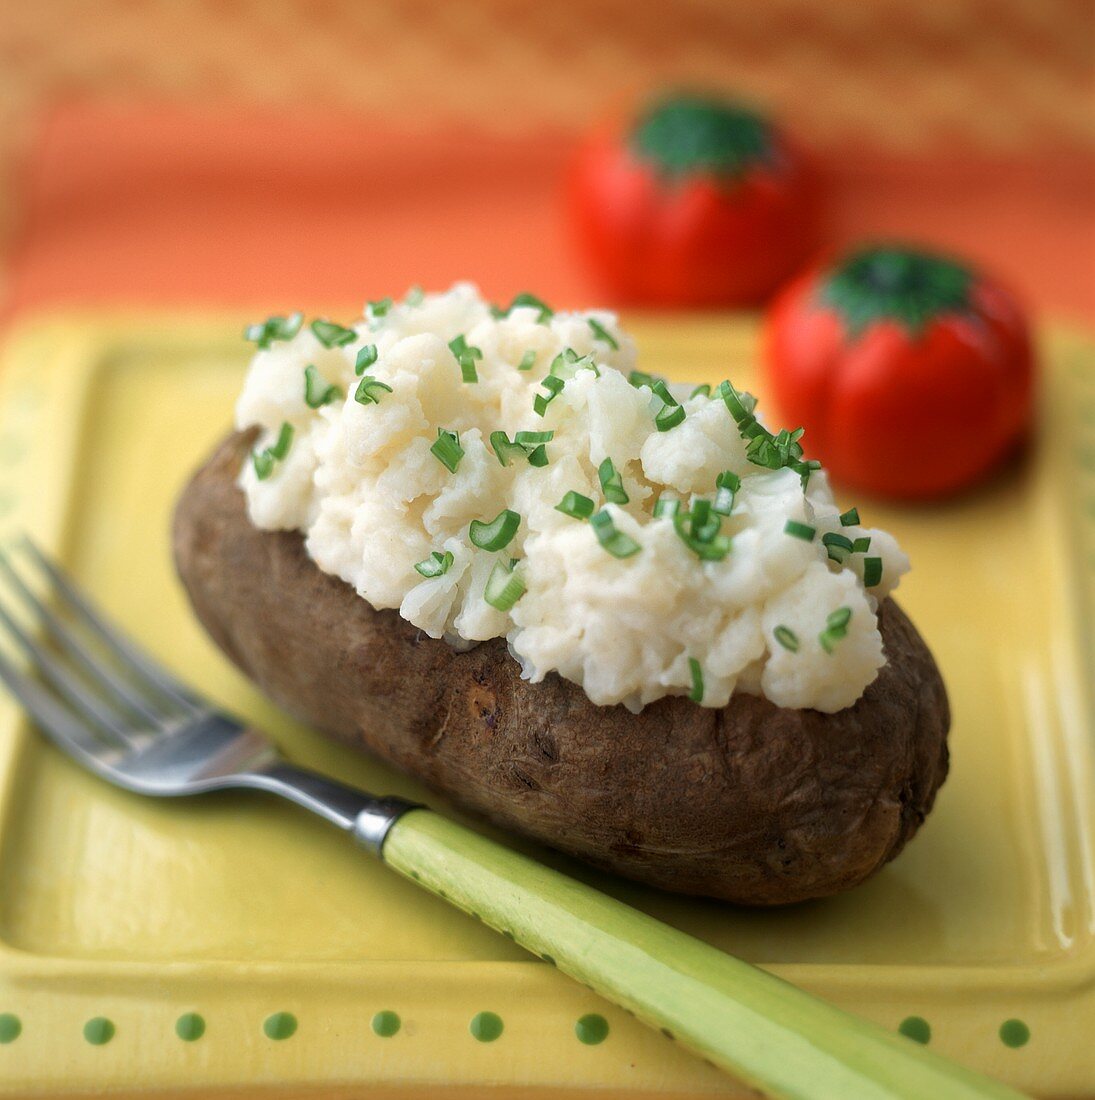 Baked potato, sprinkled with chopped spring onions